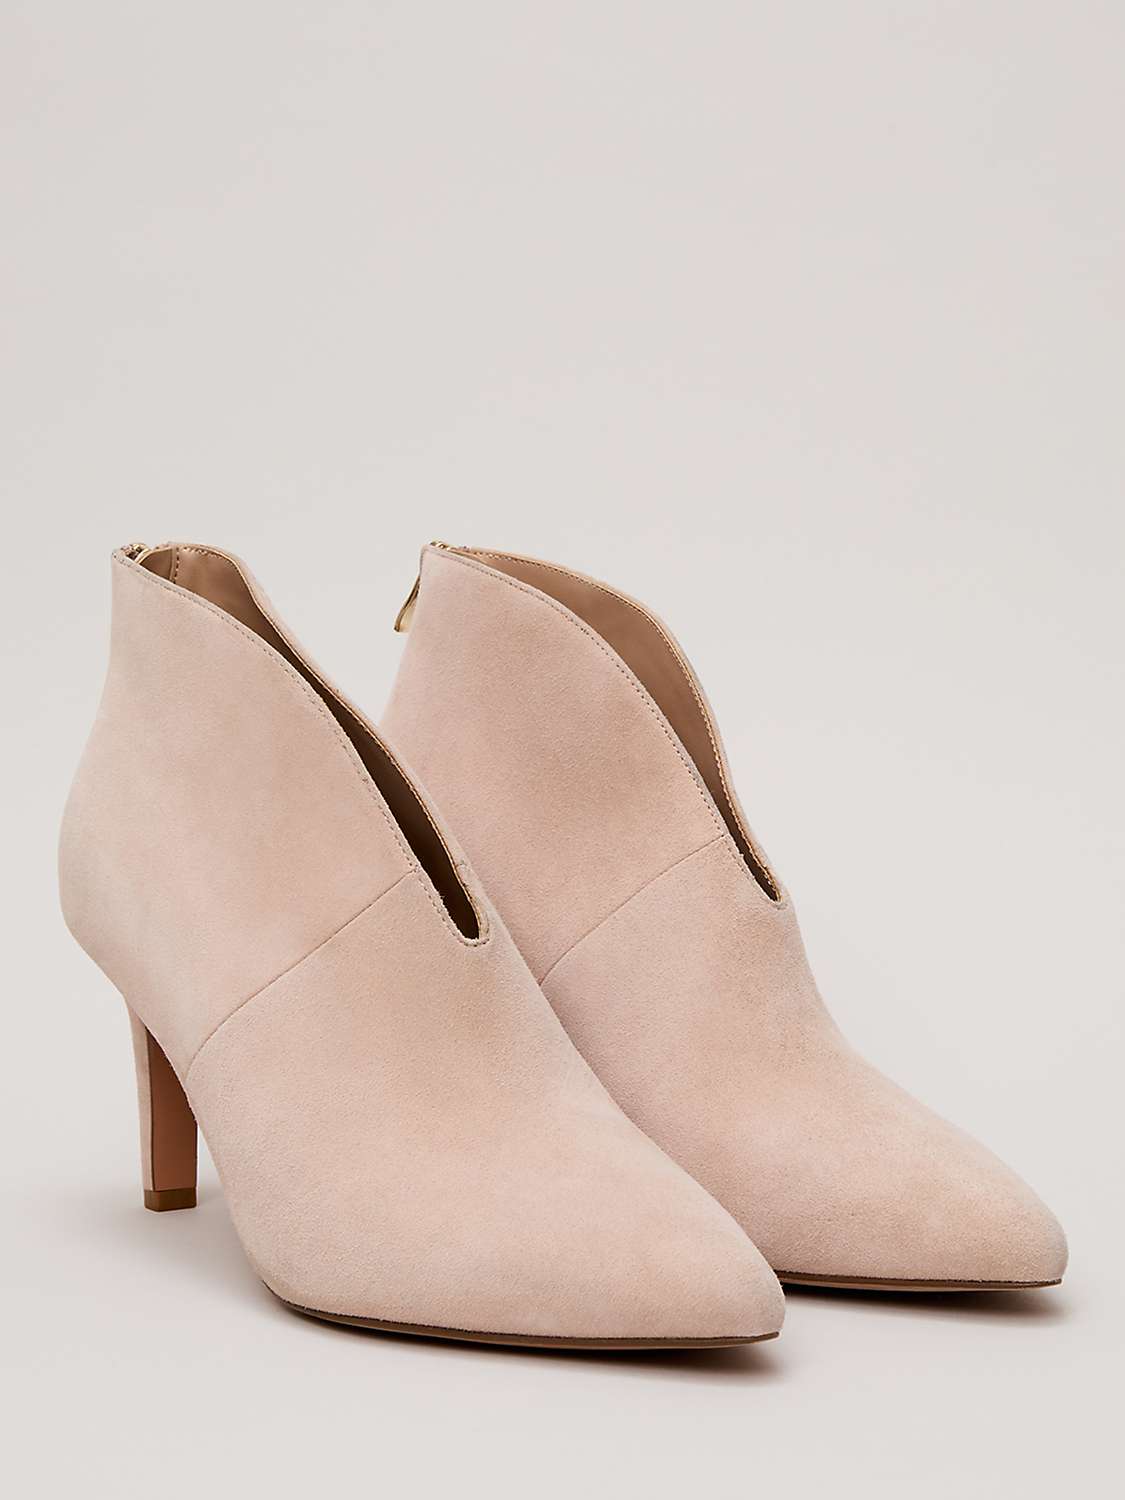 Buy Phase Eight Cut Out Suede Shoe Boots Online at johnlewis.com